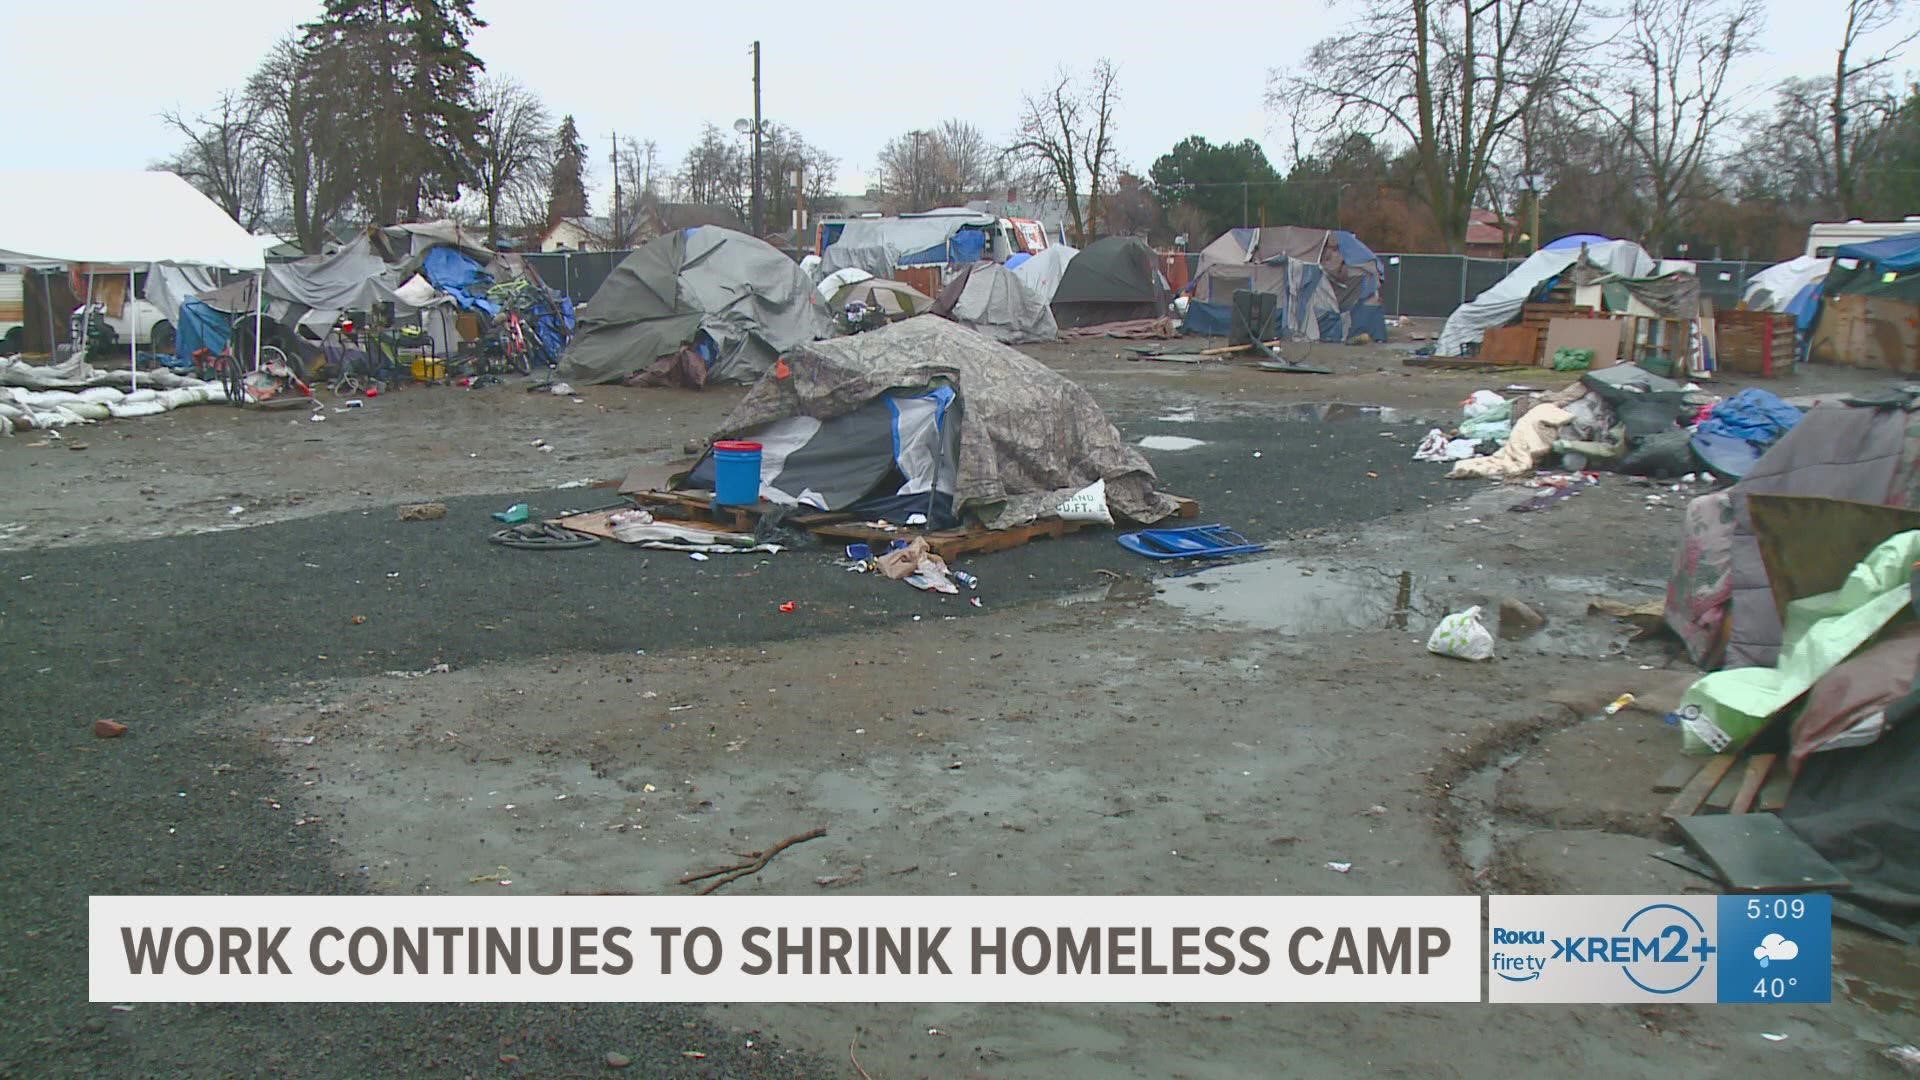 WSDOT says that over the past two months, trash and occupants have been cleared as people move out of the homeless camp off I-90.